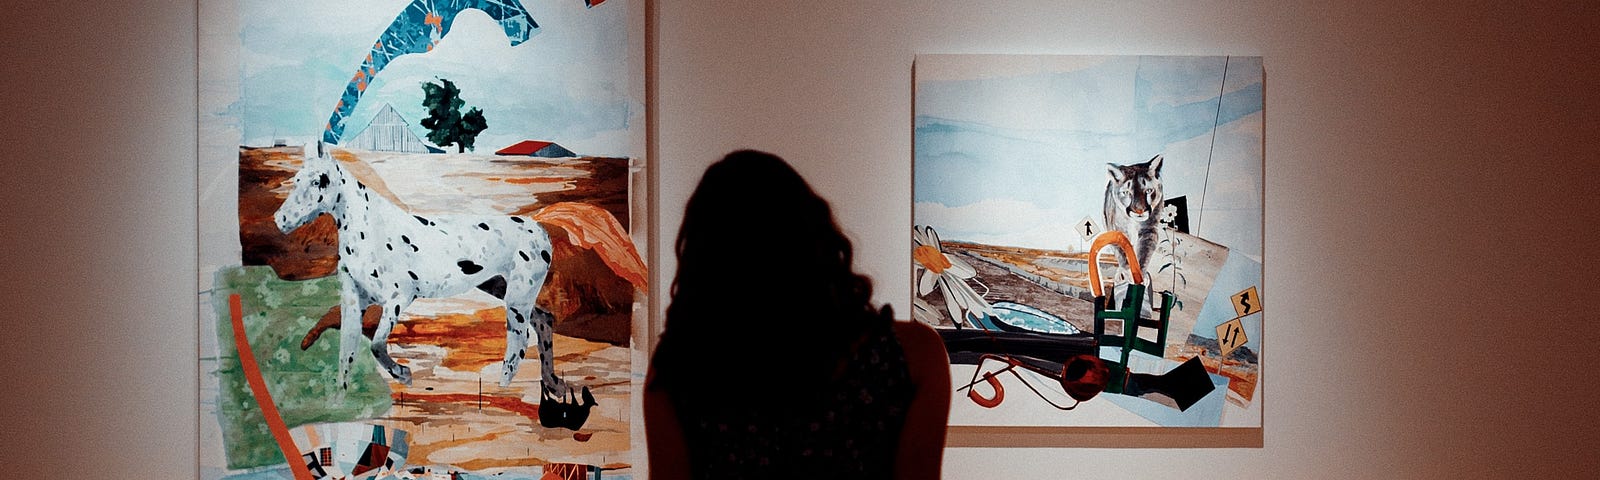 A woman is sitting alone in an art gallery, looking at two paintings on a wall.